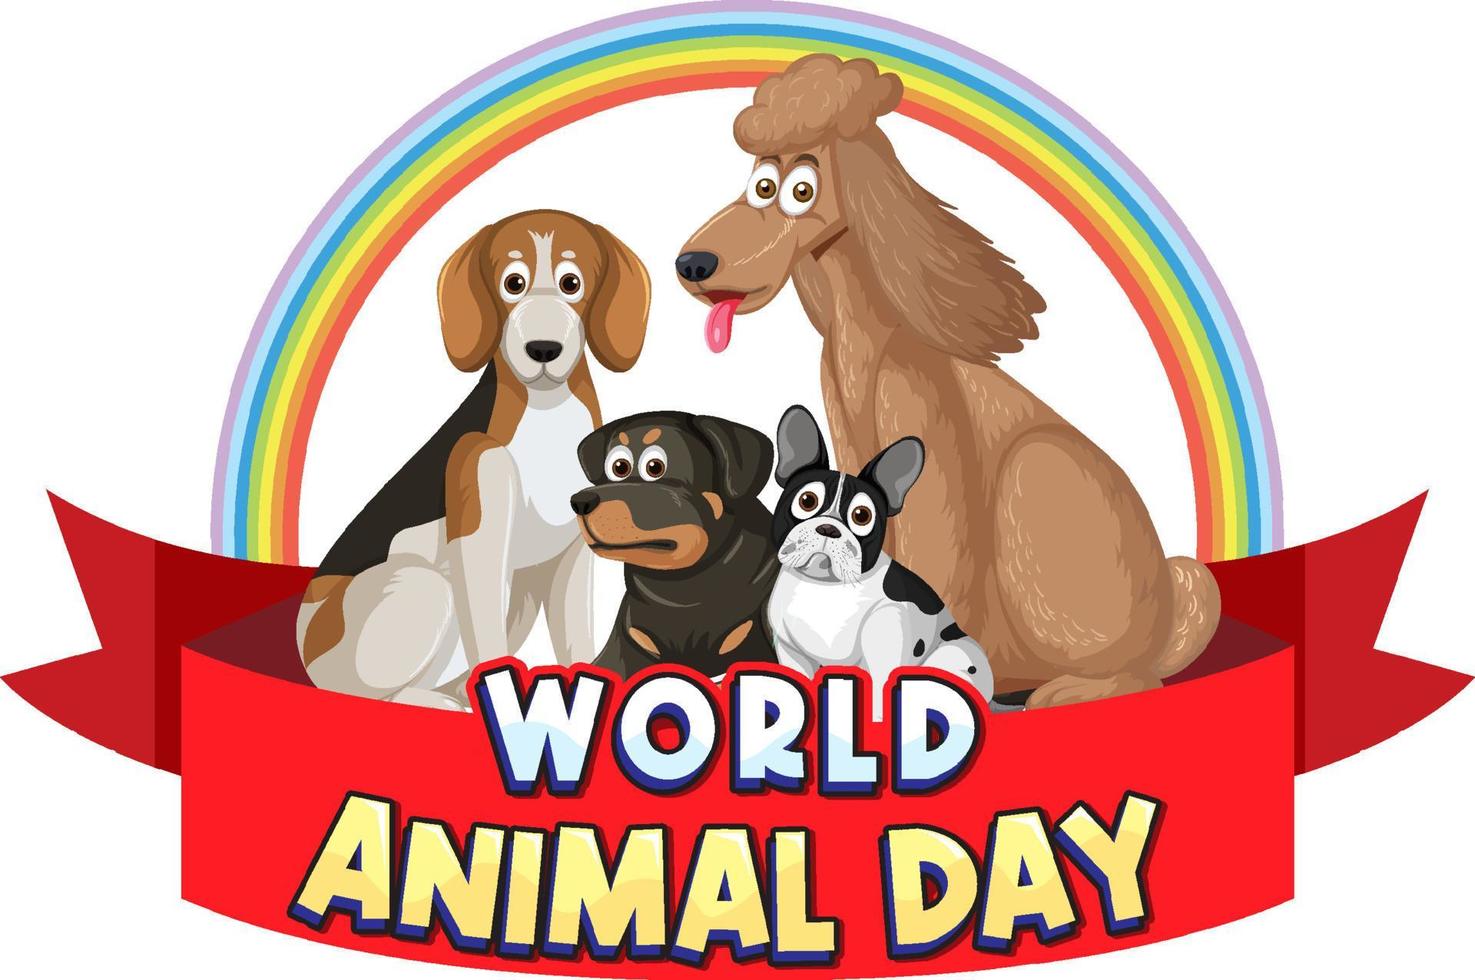 World Animal Day logo with cute dogs vector